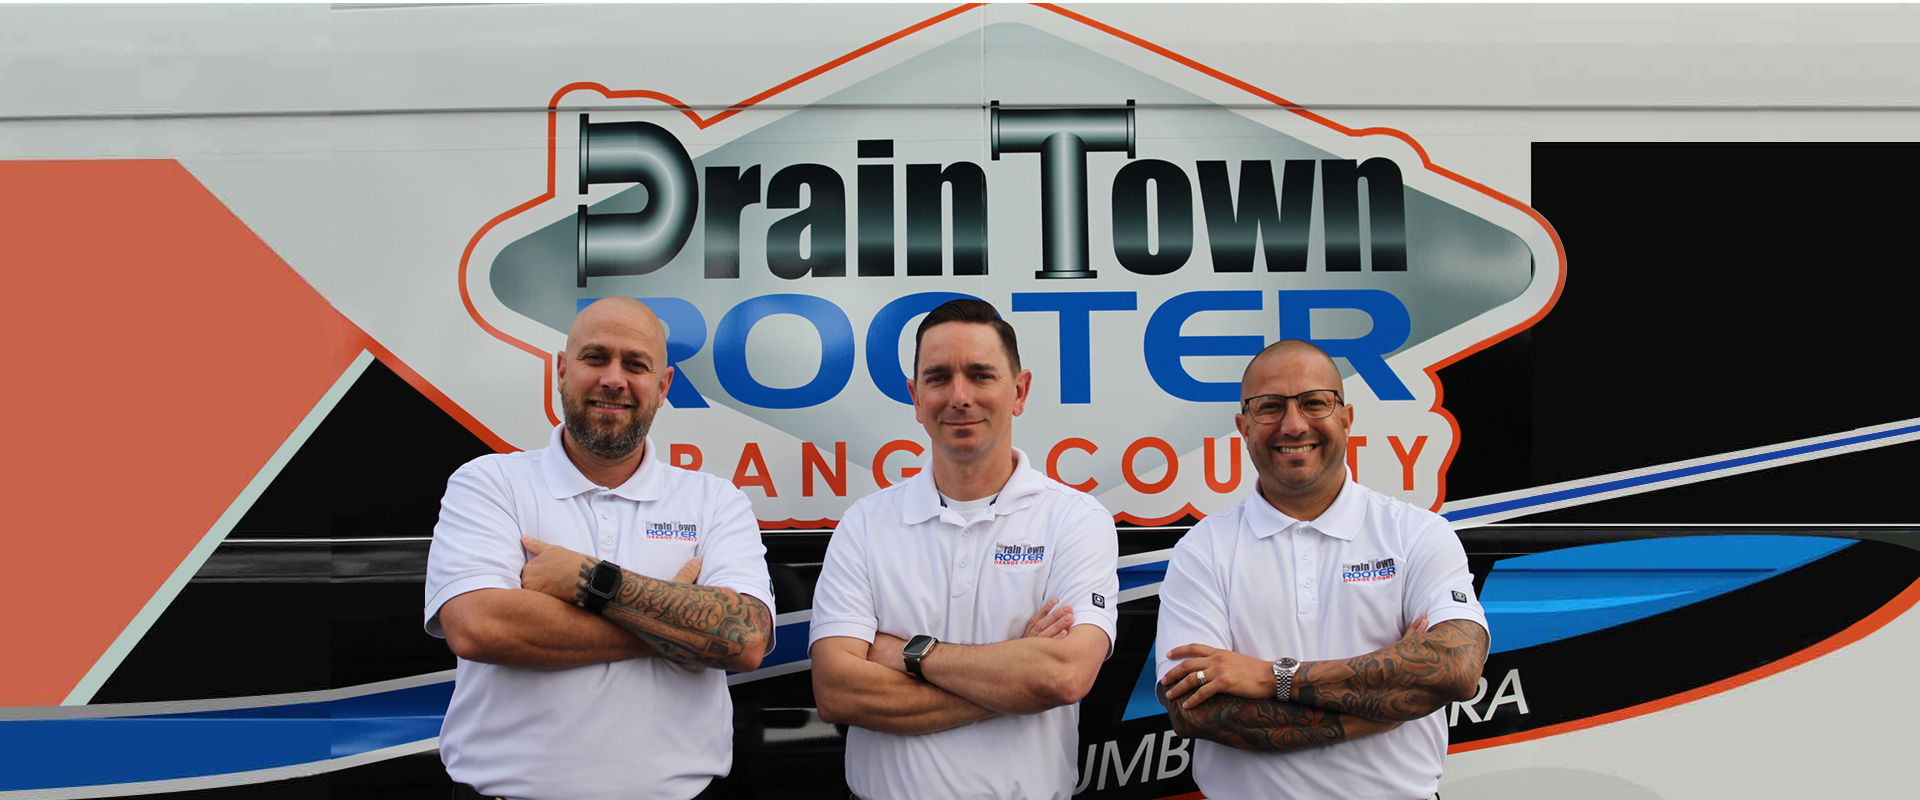 draintown rooter team